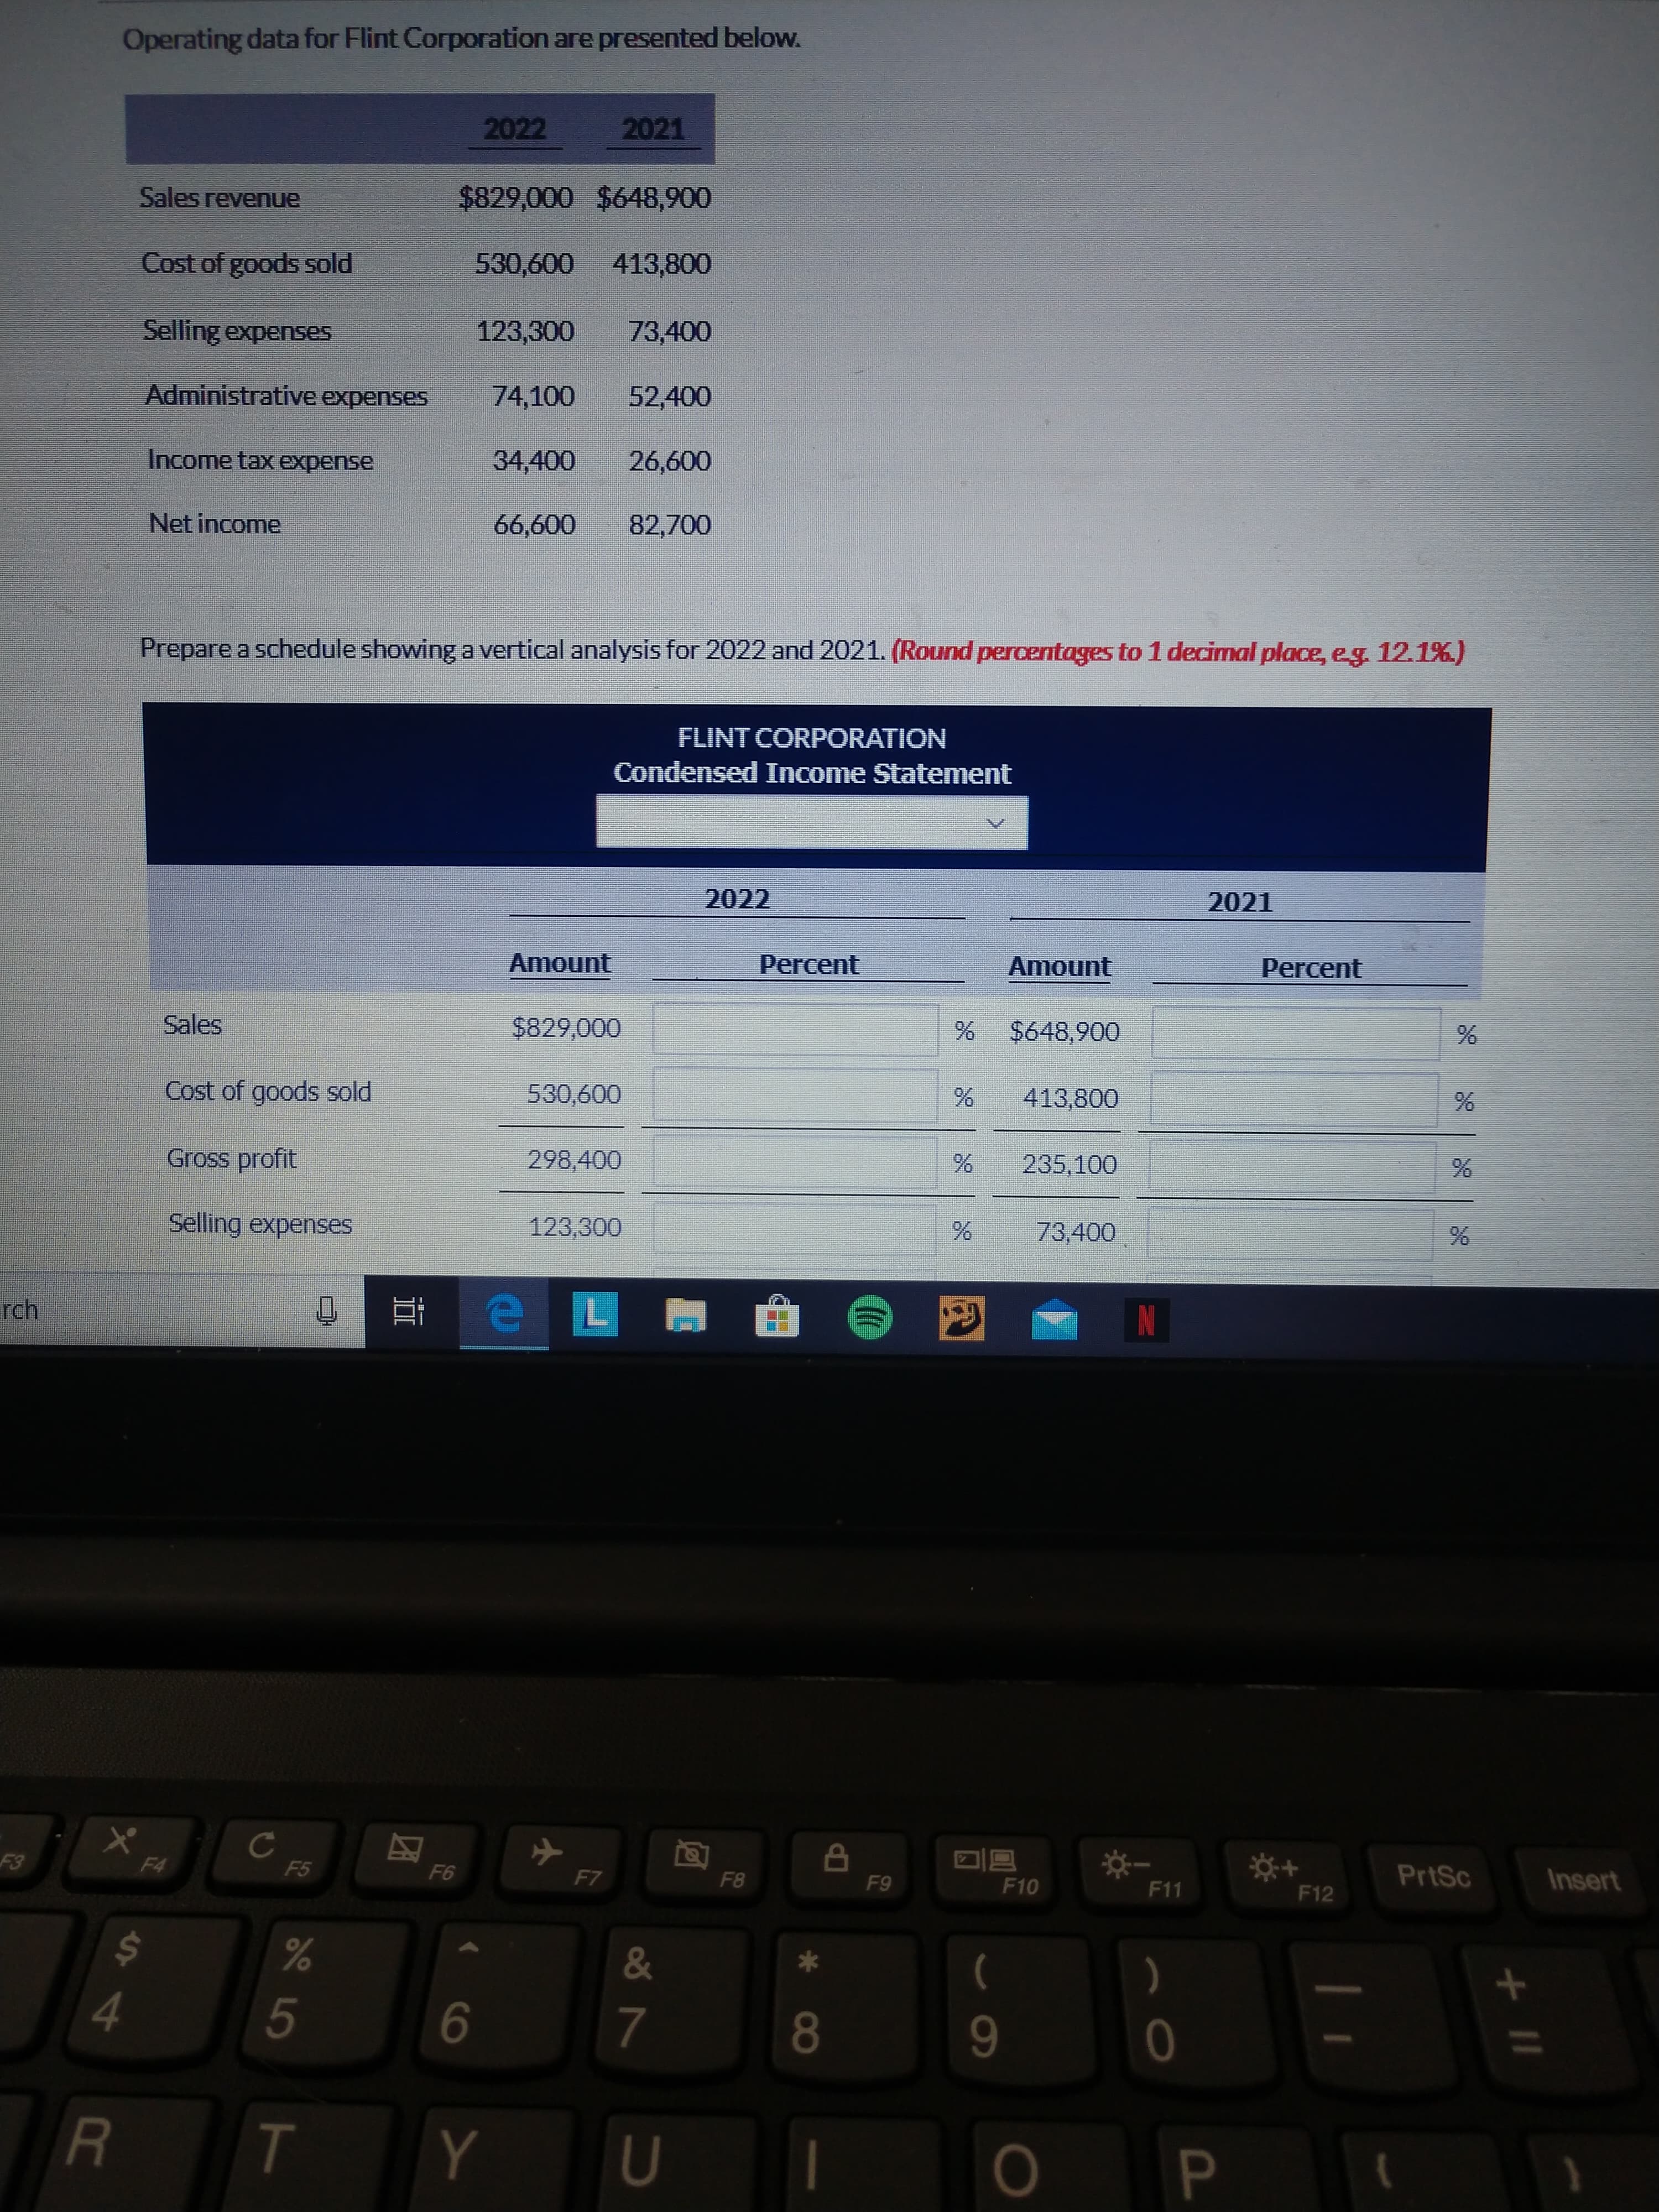 Operating data for Flint Corporation are presented below.
2022
2021
Sales revenue
$829,000 $648,900
Cost of goods sold
530,600
413,800
Selling expenses
123,300
73,400
Administrative expenses
74,100
52,400
Income tax expense
34,400
26,600
Net income
66,600
82,700
Prepare a schedule showing a vertical analysis for 2022 and 2021. (Round percentages to 1 decimal place, eg. 12.1%.)
FLINT CORPORATION
Condensed Income Statement
2022
2021
Amount
Percent
Amount
Percent
Sales
$829,000
$648,900
Cost of goods sold
530,600
413,800
Gross profit
298,400
235,100
Selling expenses
123,300
73,400
rch
PrtSc
Insert
F4
F5
F6
F7
F8
F9
F10
F11
F12
Es
24
&
)
4.
5
8
T
Y.
+ II
